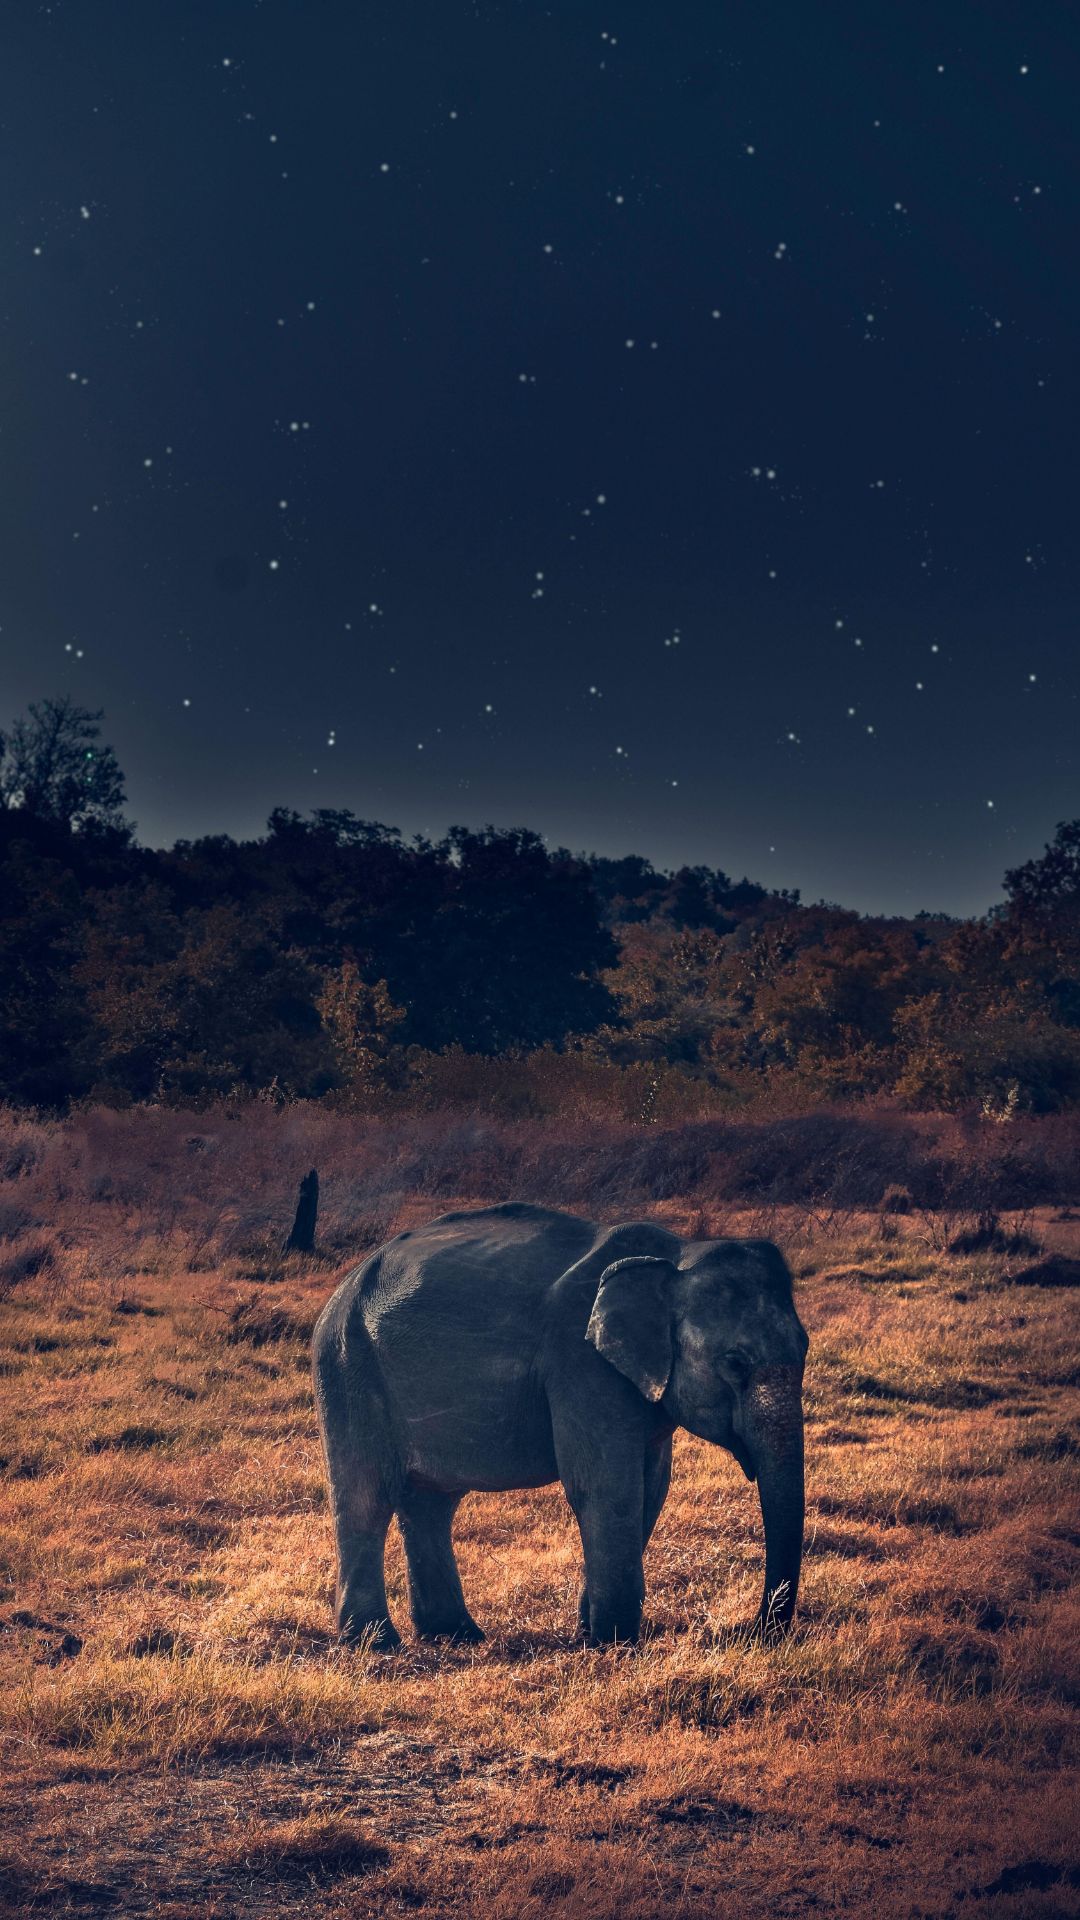 Elephant Wallpapers - Top 30 Best Elephant Wallpapers [ HQ ]